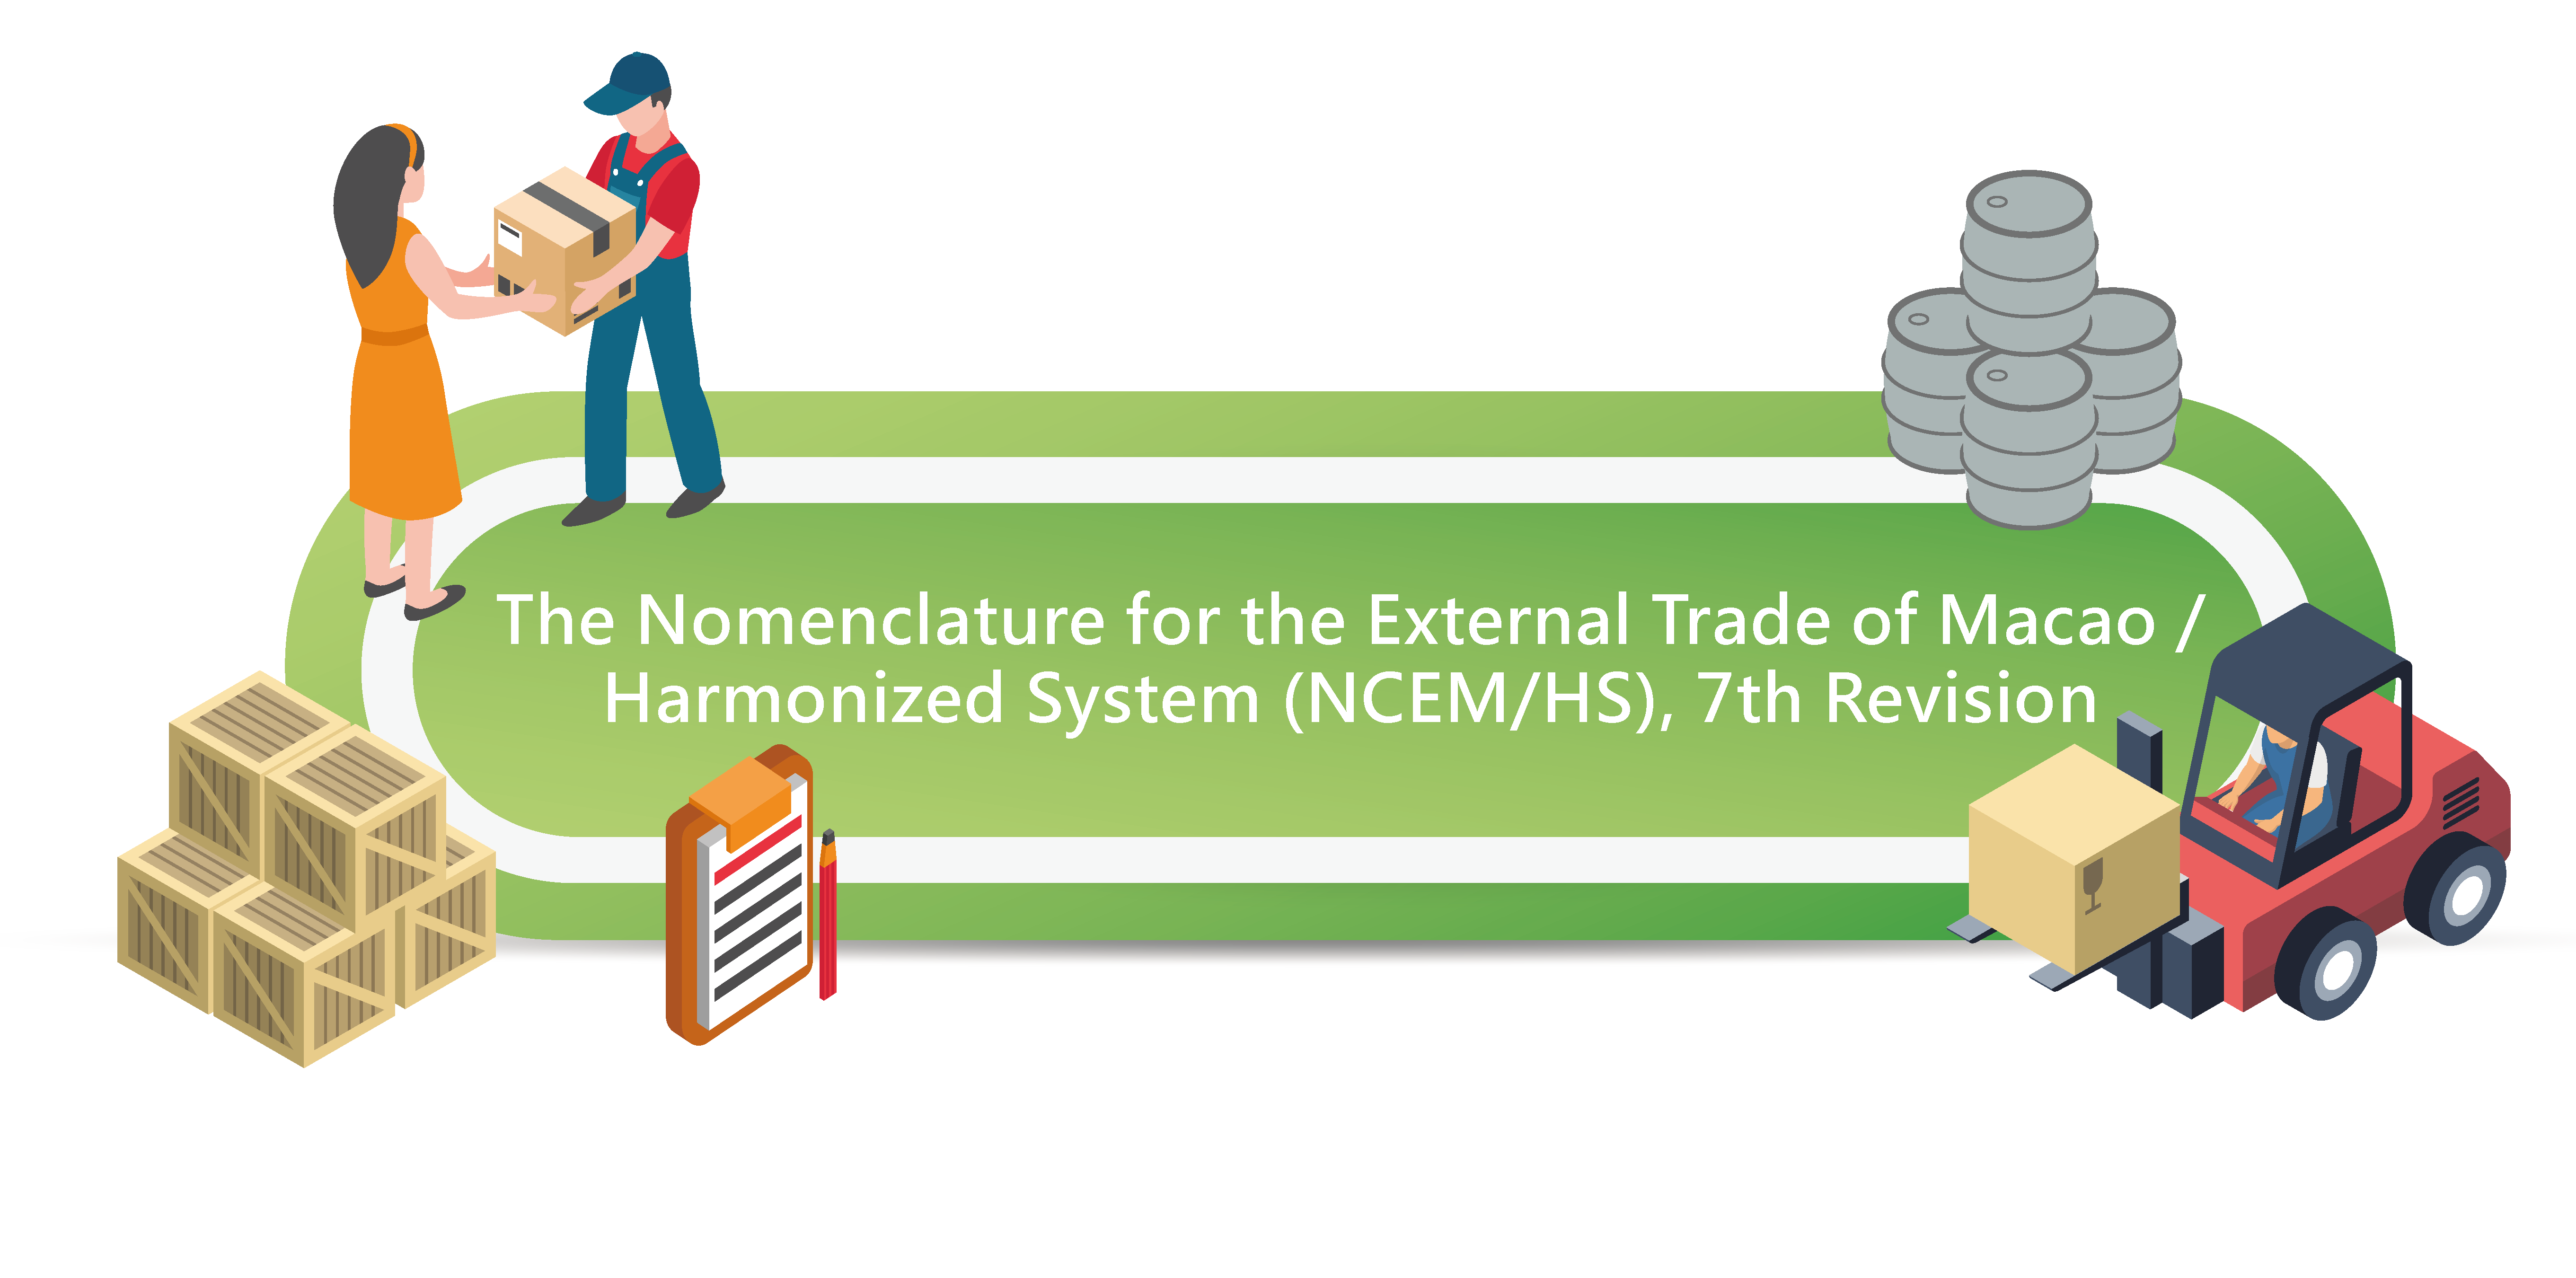 THE NOMENCLATURE FOR THE EXTERNAL TRADE OF MACAO/HARMONIZED SYSTEM